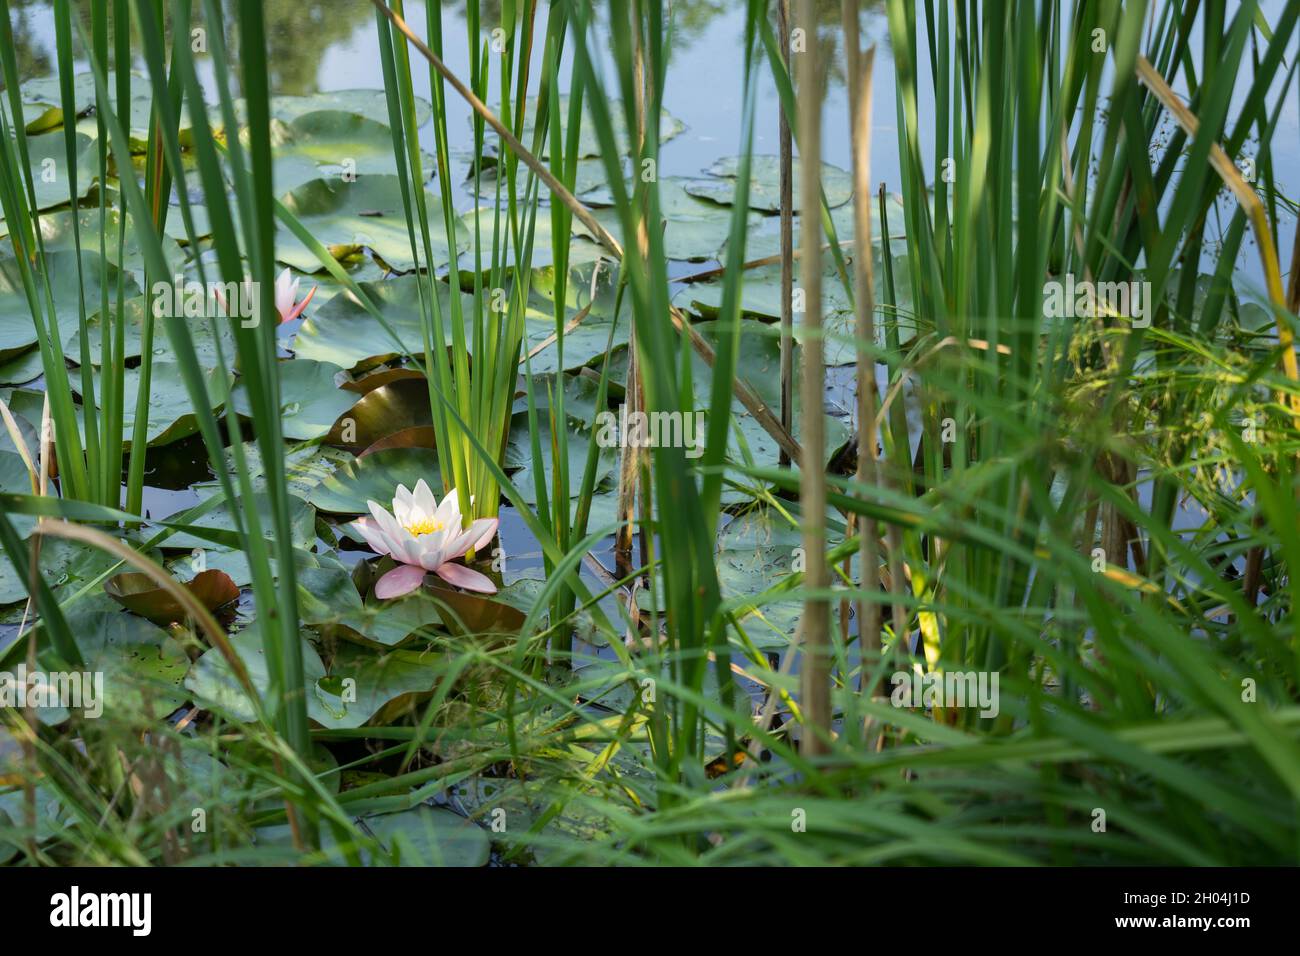 blooming water lily and reed grass in an idyllic pond nature background Stock Photo